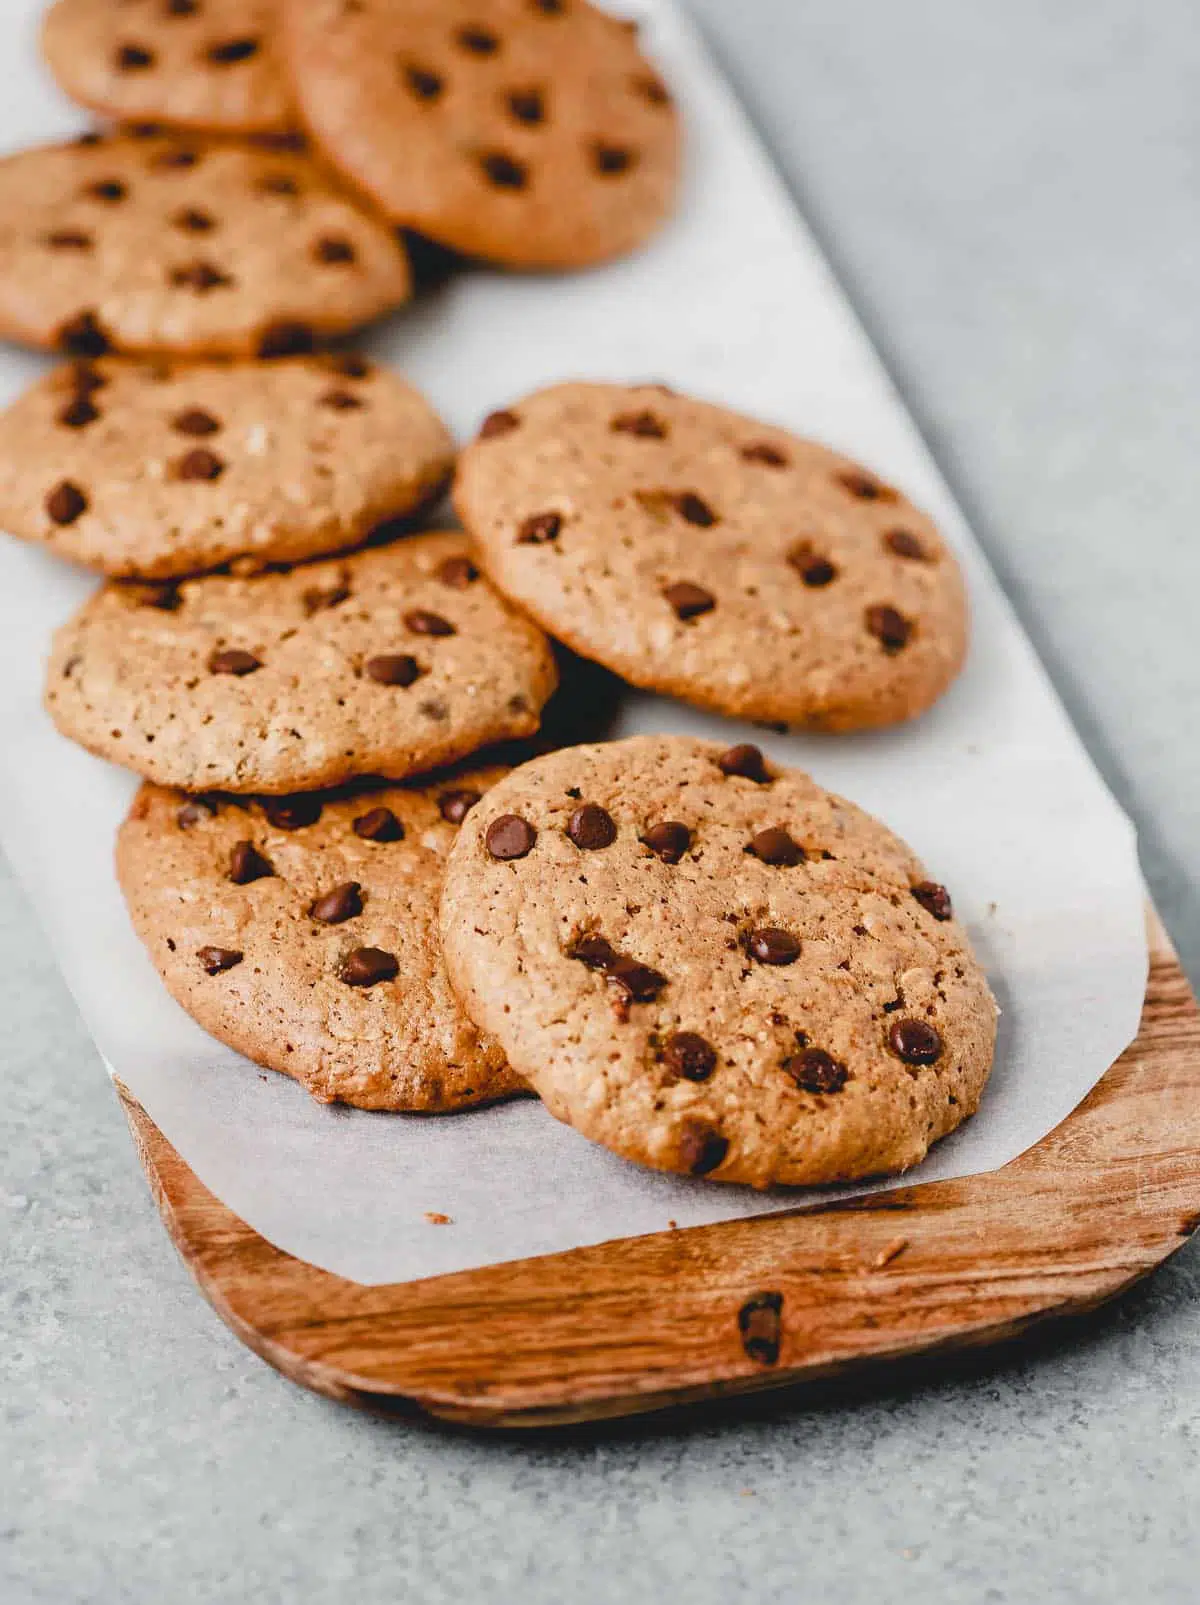 Brown cookies with oats and chocolate chips in them sitting on a wood platter.